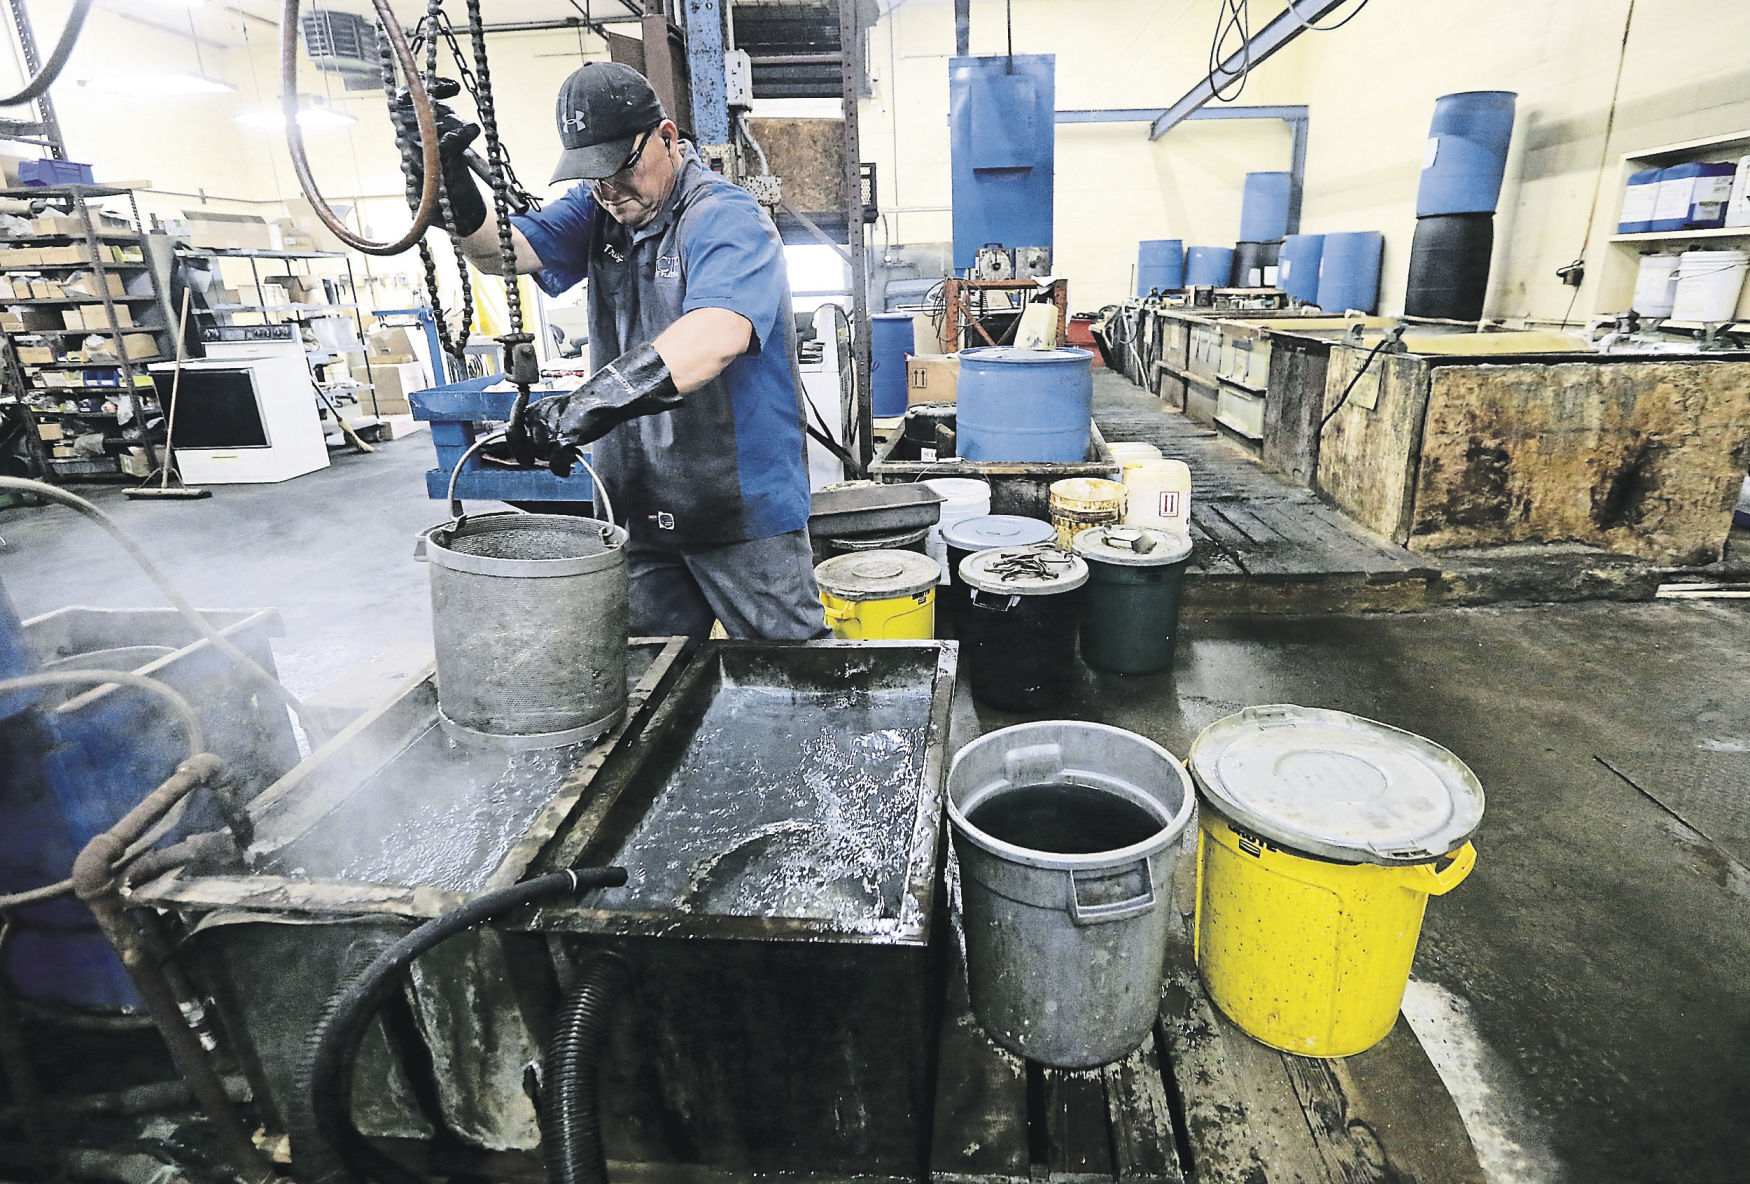 Troy Mulholland works to barrel zinc clear finish items at Key City Plating in Dubuque. The business started in 1971. Its focus is working on smaller quantities of metal parts that need refinishing. Rich Conlon assumed ownership of the business around 2008. PHOTO CREDIT: JESSICA REILLY